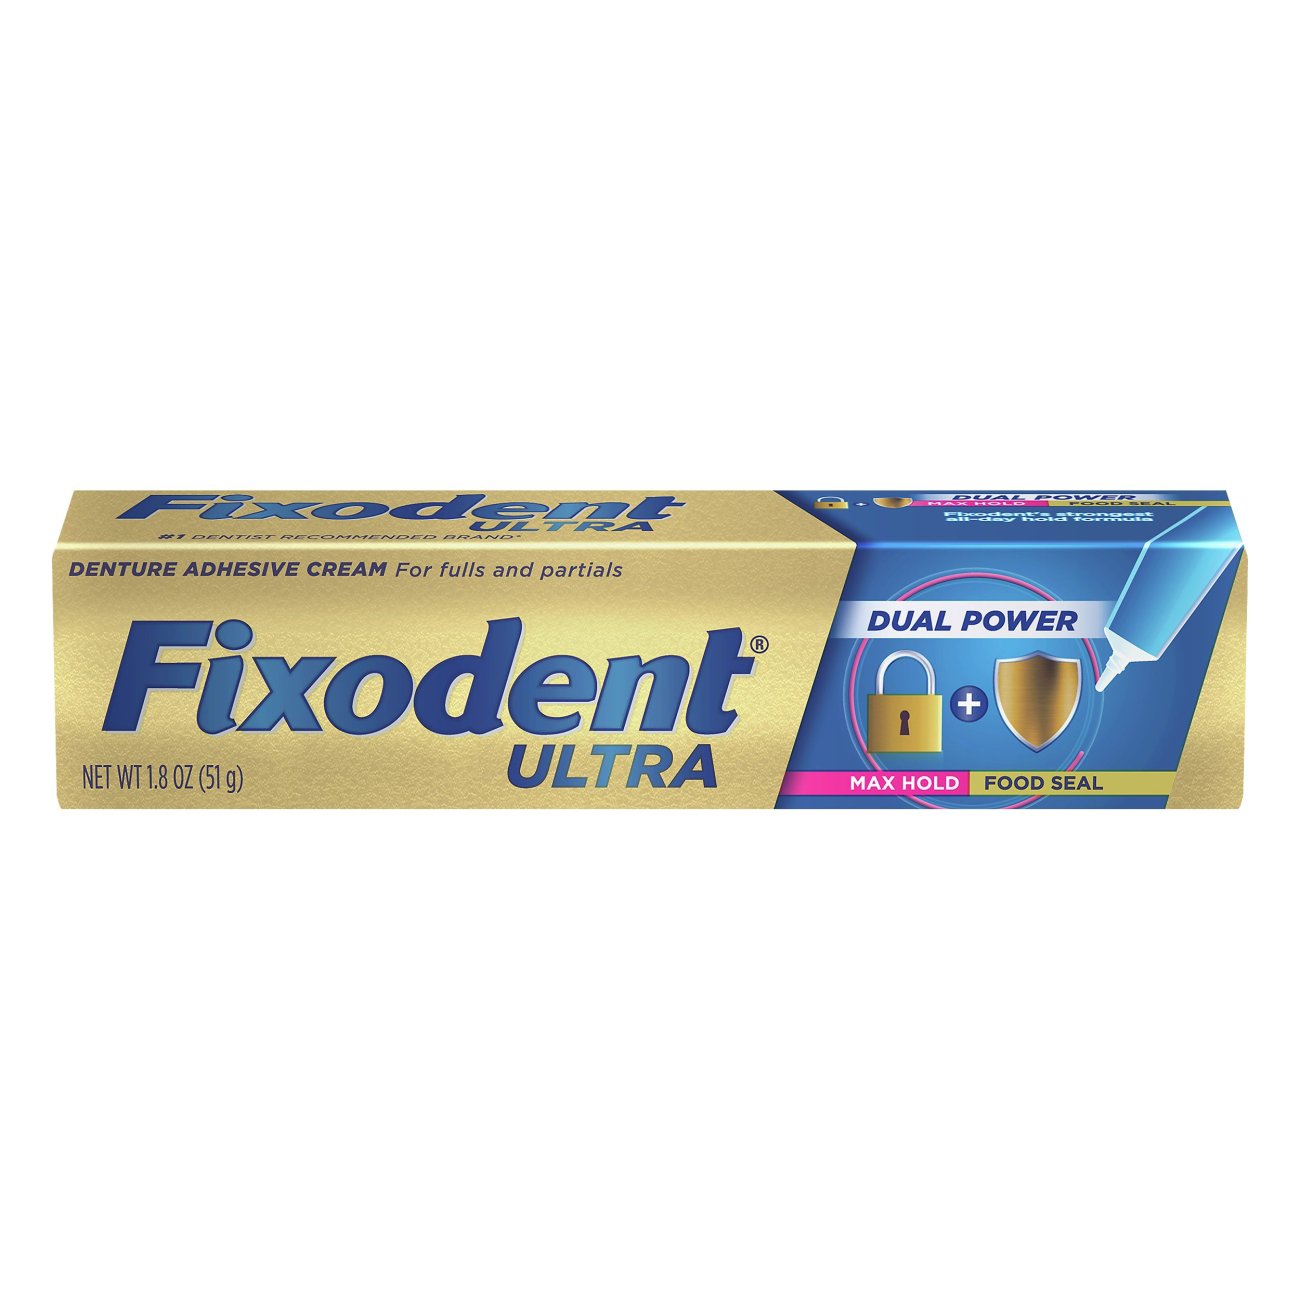 fixodent seal ultra denture adhesive plus care